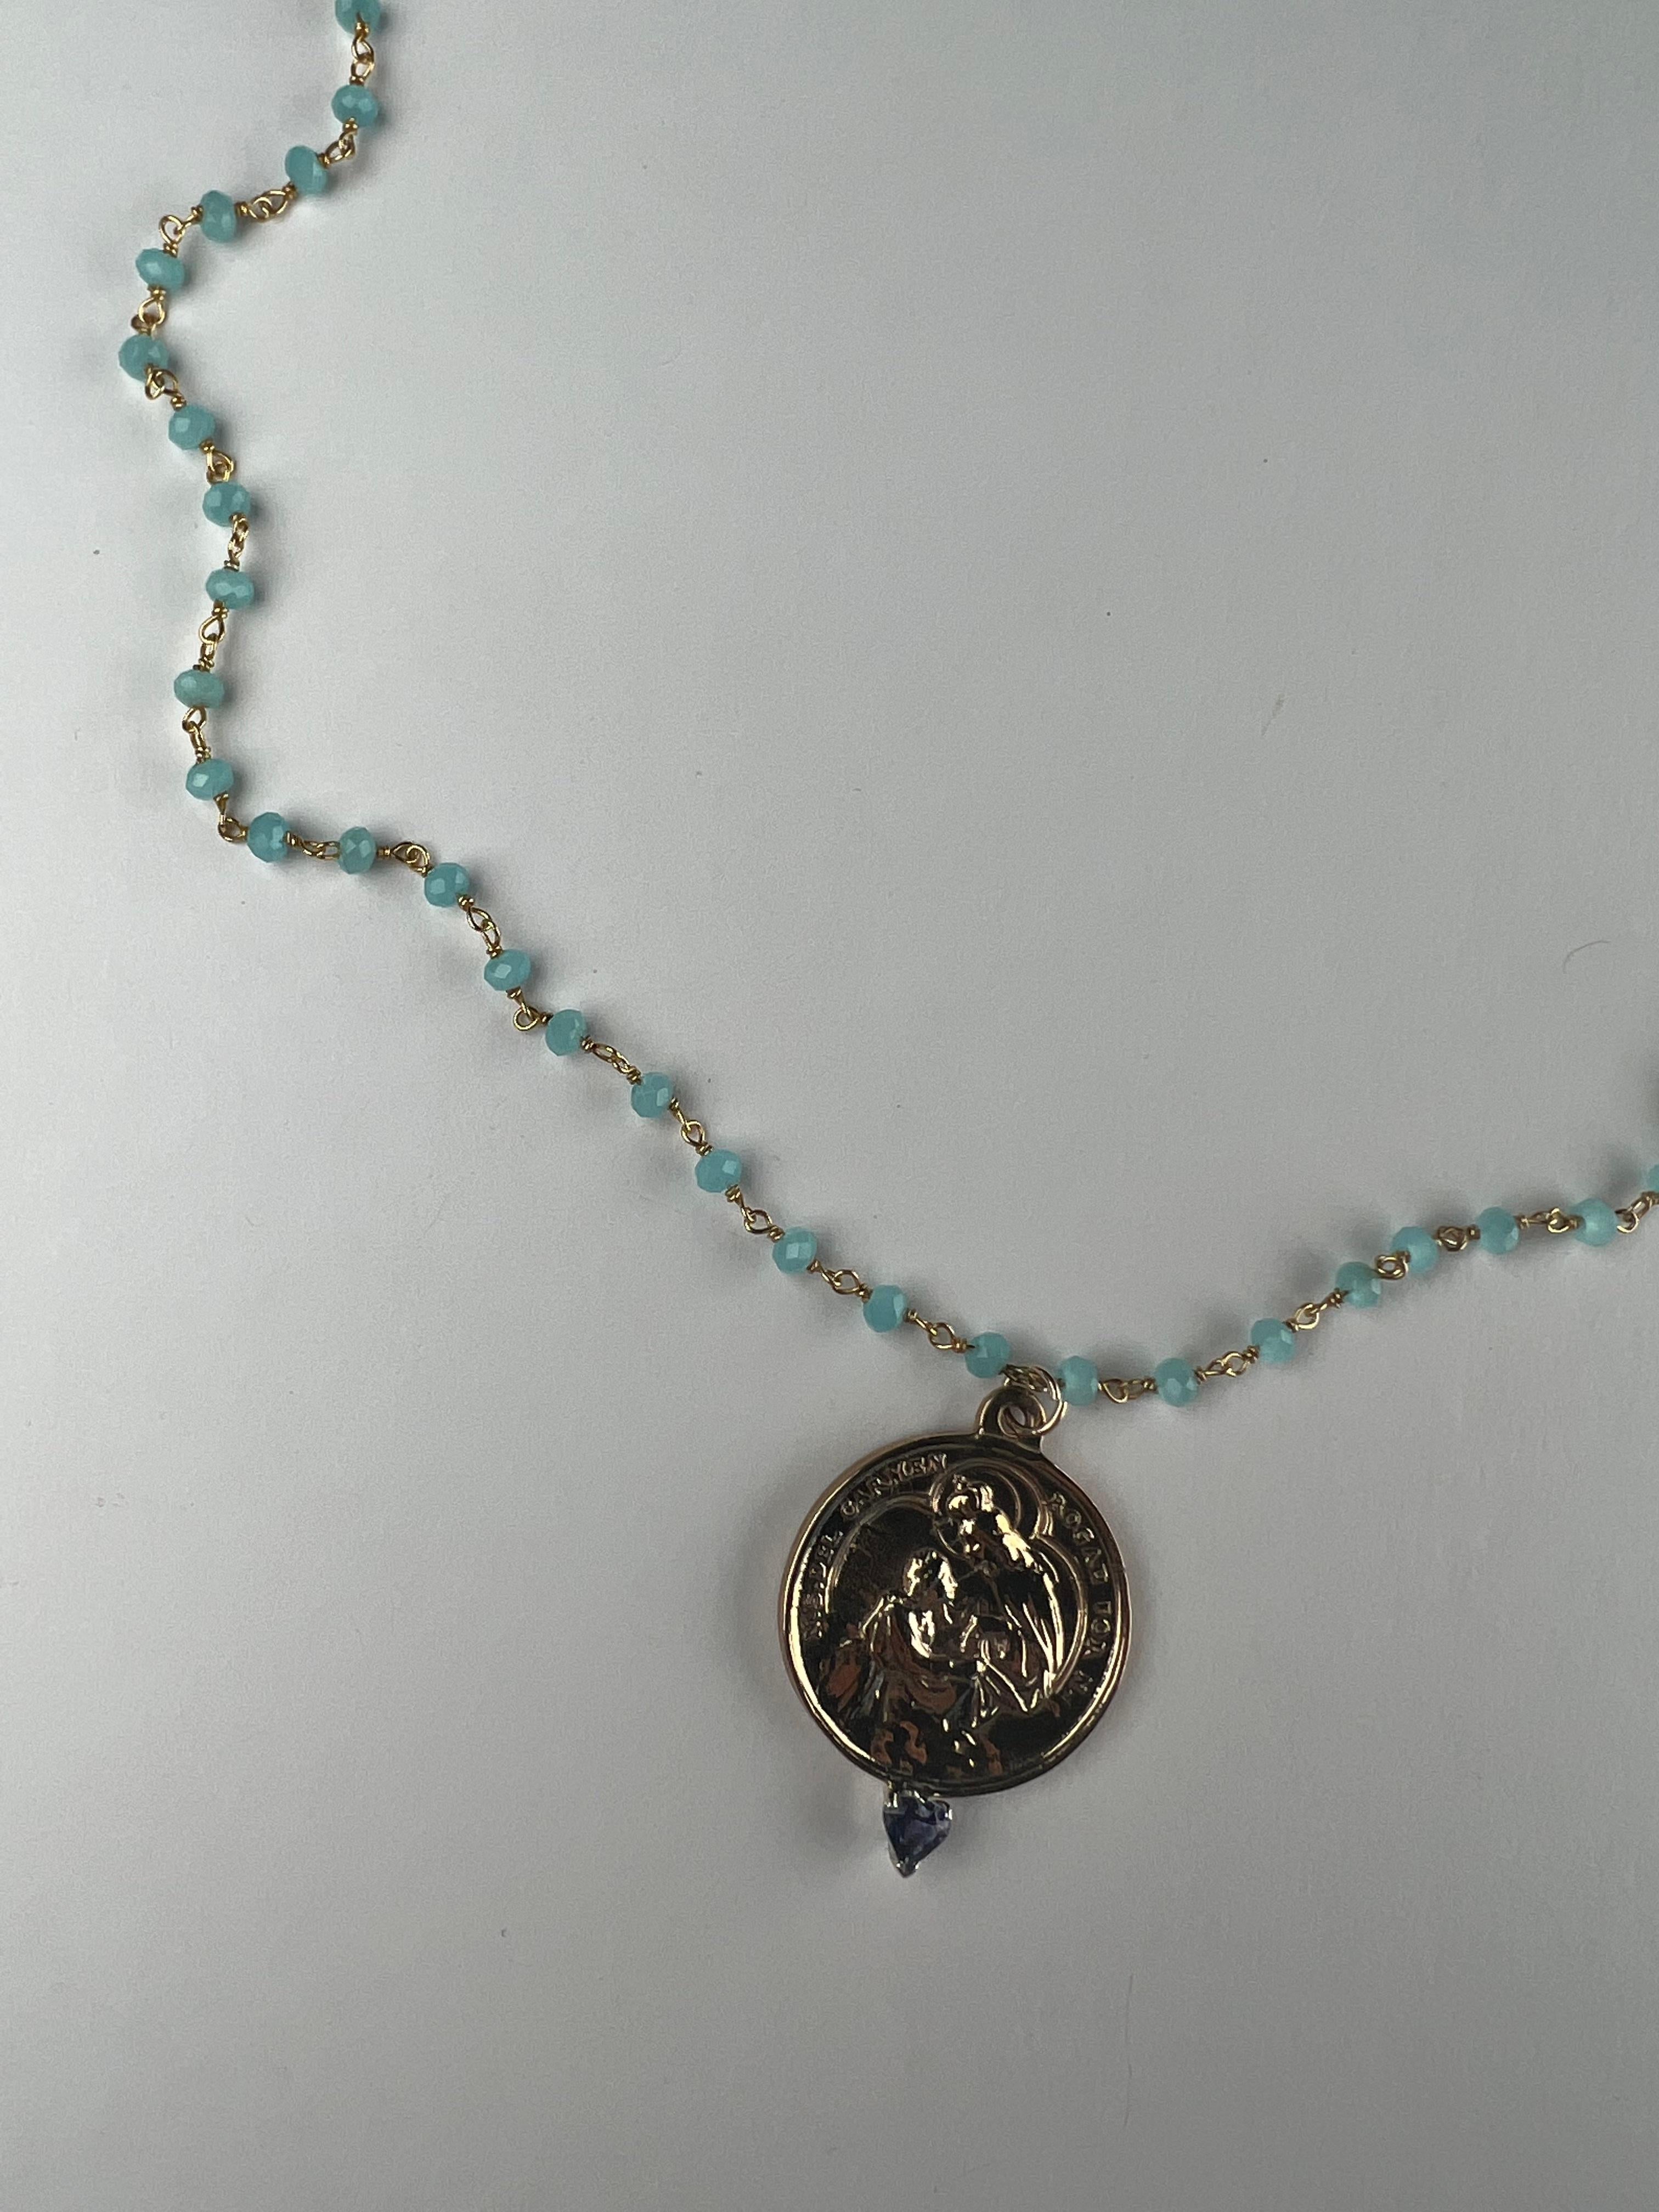 Heart Medal Necklace Virgin Mary Bead Chain Tanzanite J Dauphin For Sale 1